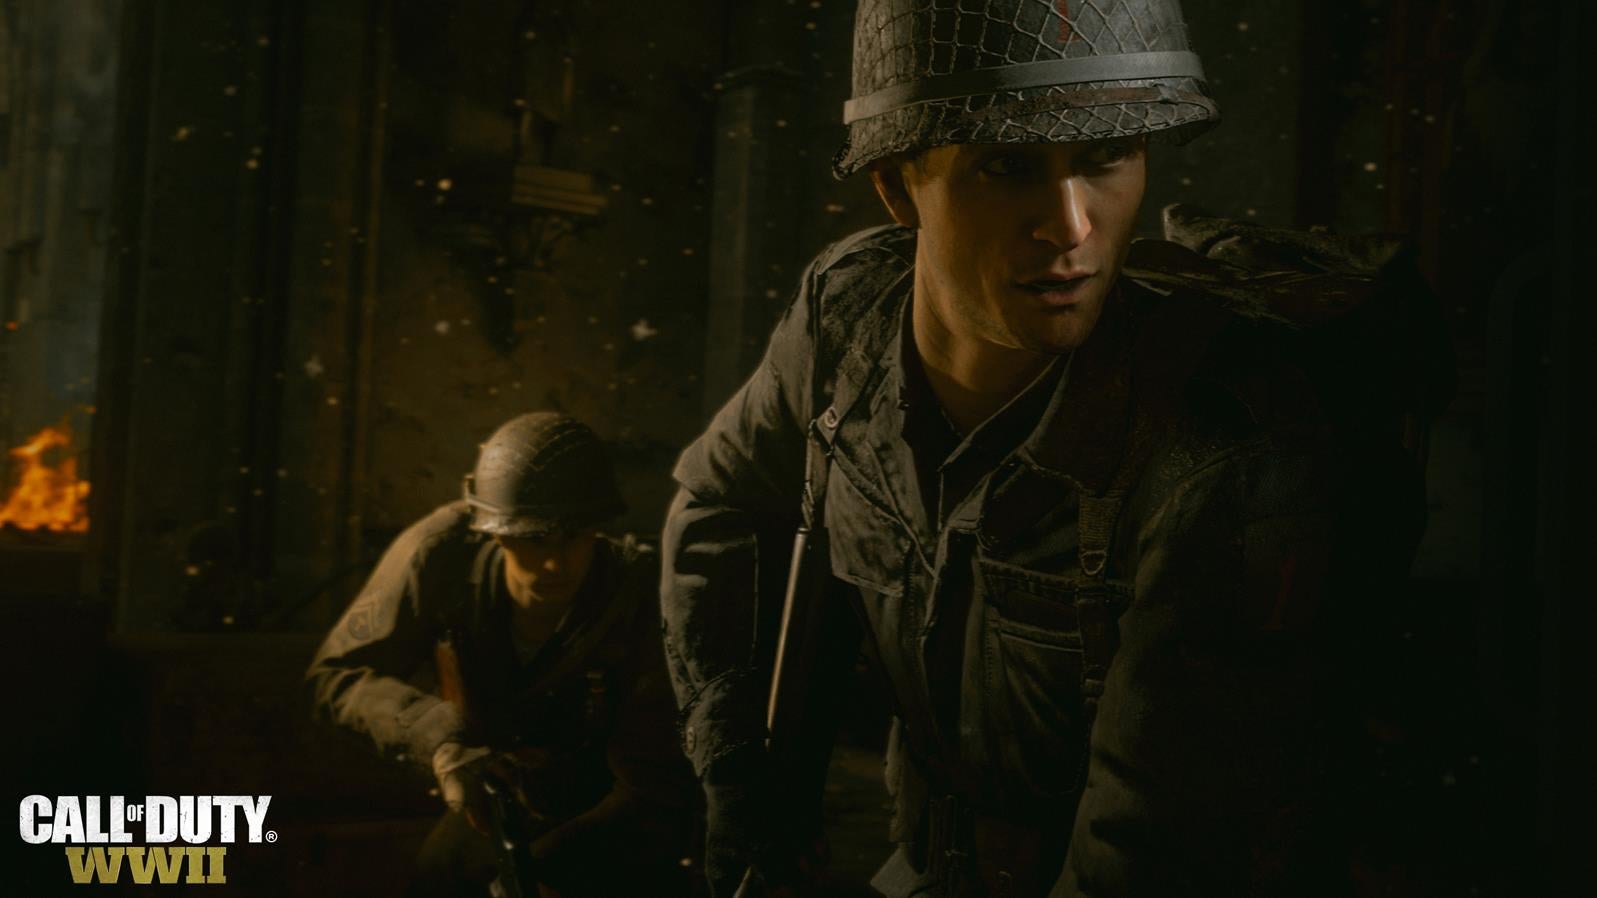 Image for Call of Duty: WW2 multiplayer has no swastikas, allows race and gender customisation across both factions